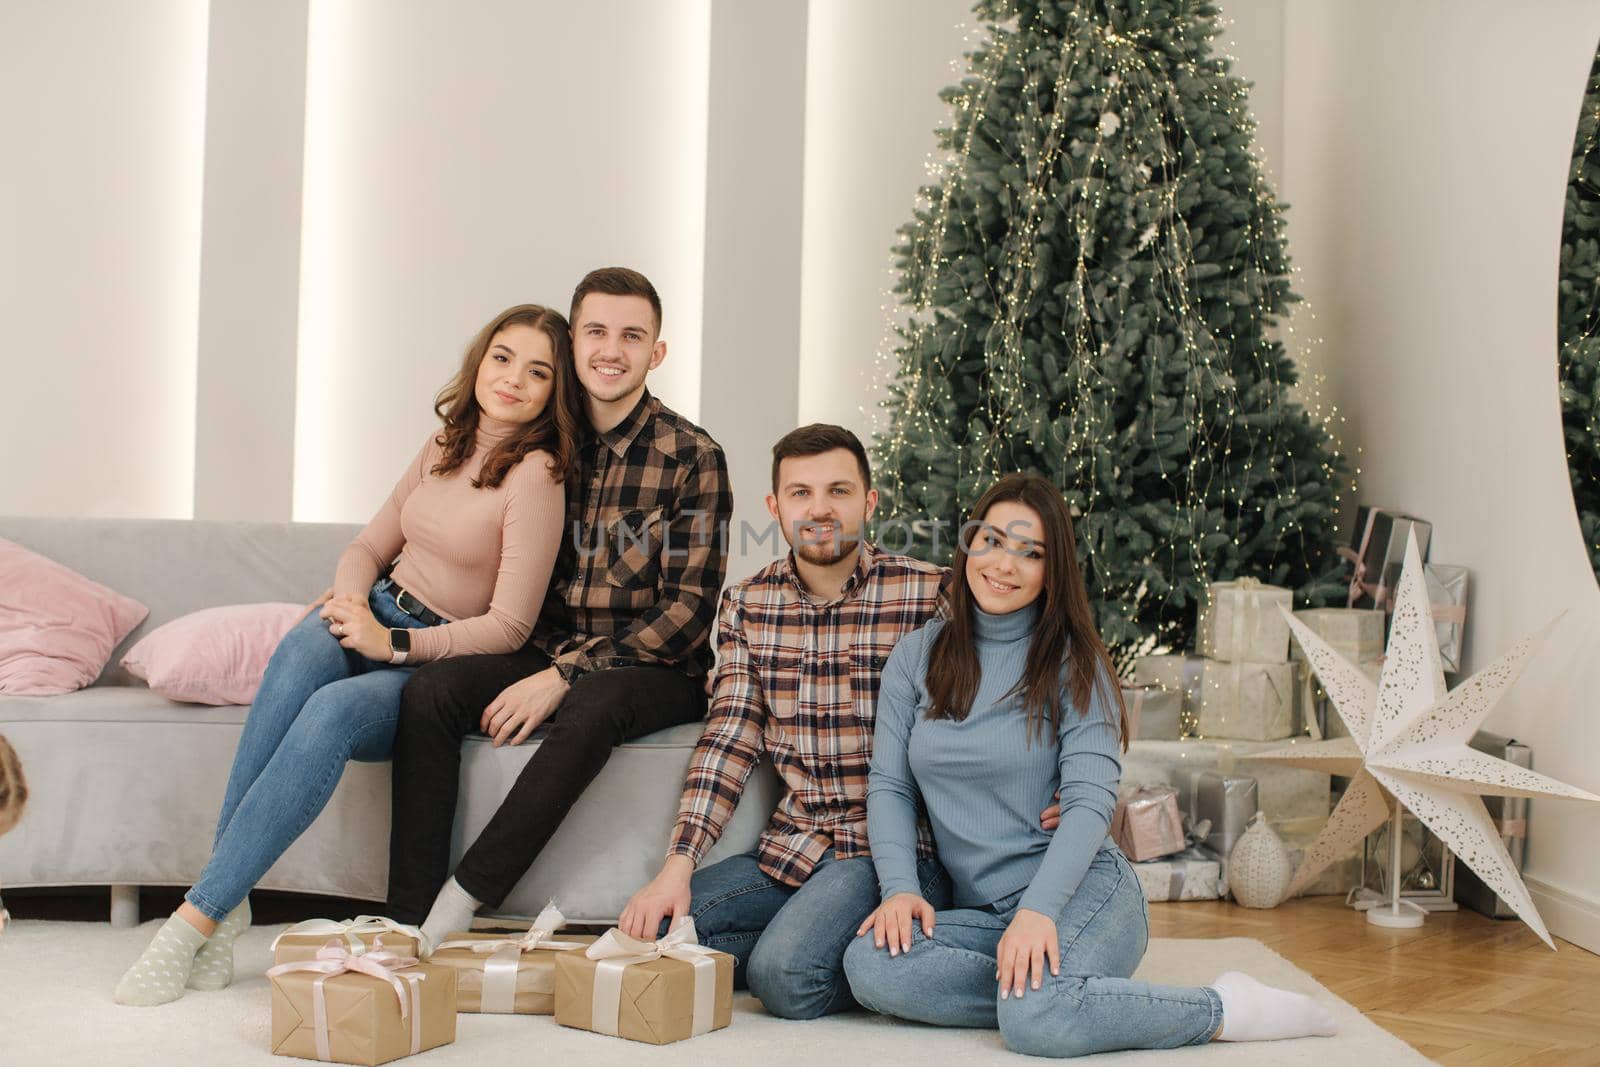 Two brother with their wifes at New Year photosession. Beautiful woman and man in front of fir tree. Christmas mood by Gritsiv